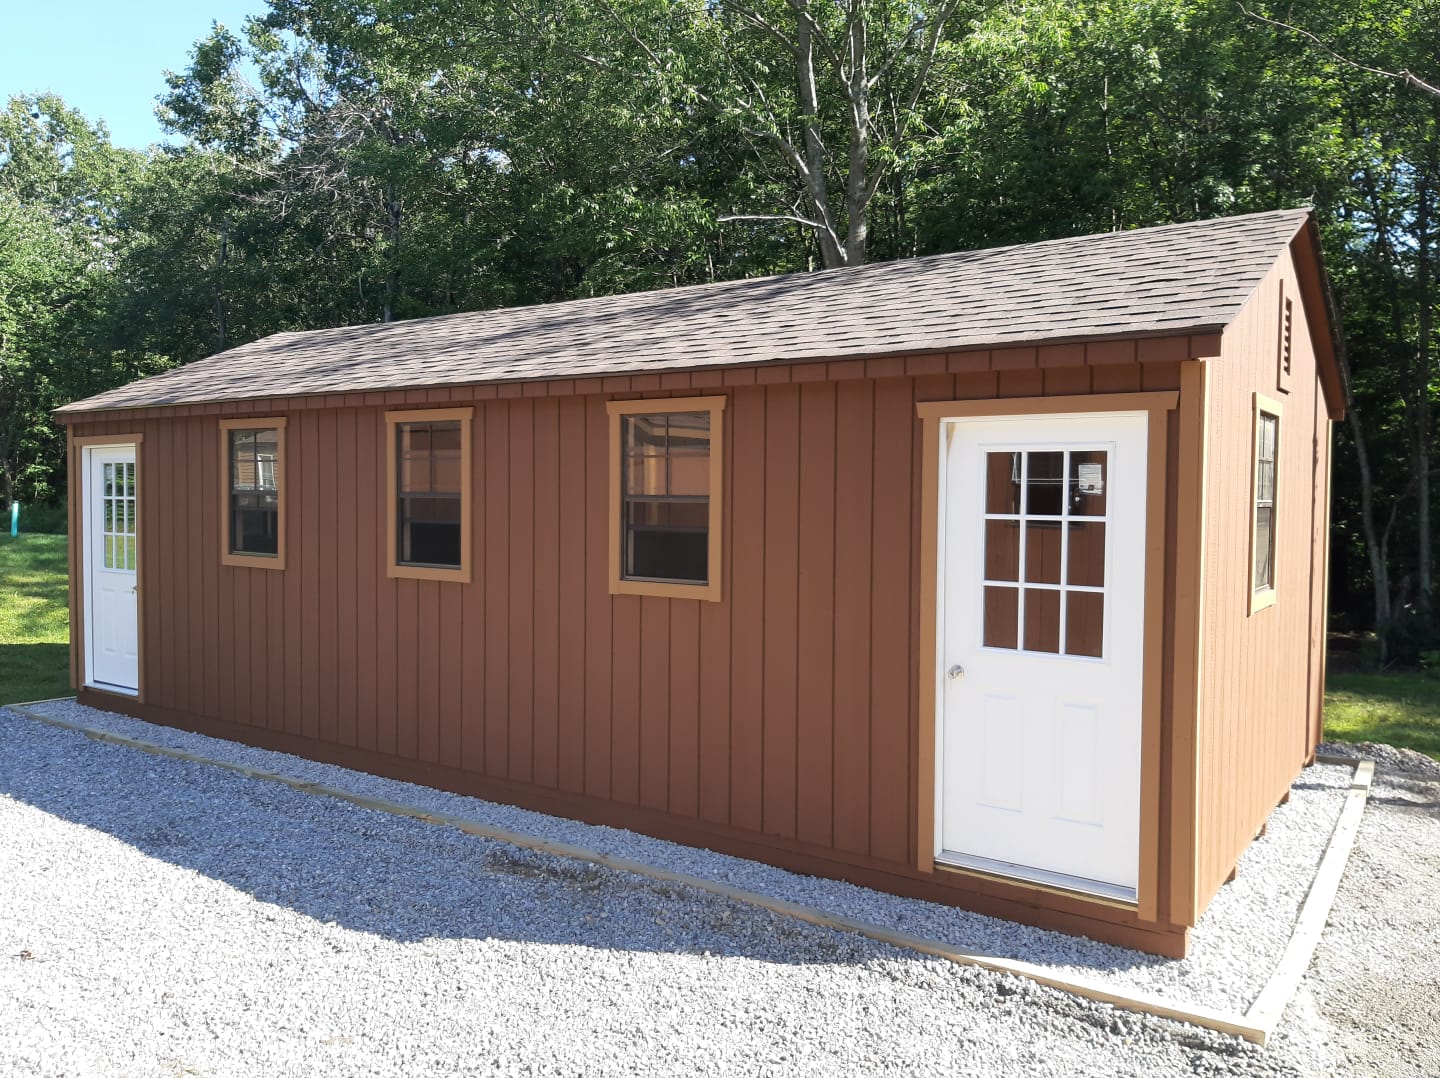 10 x 16 Sheds Econoline Ranch Shed Style